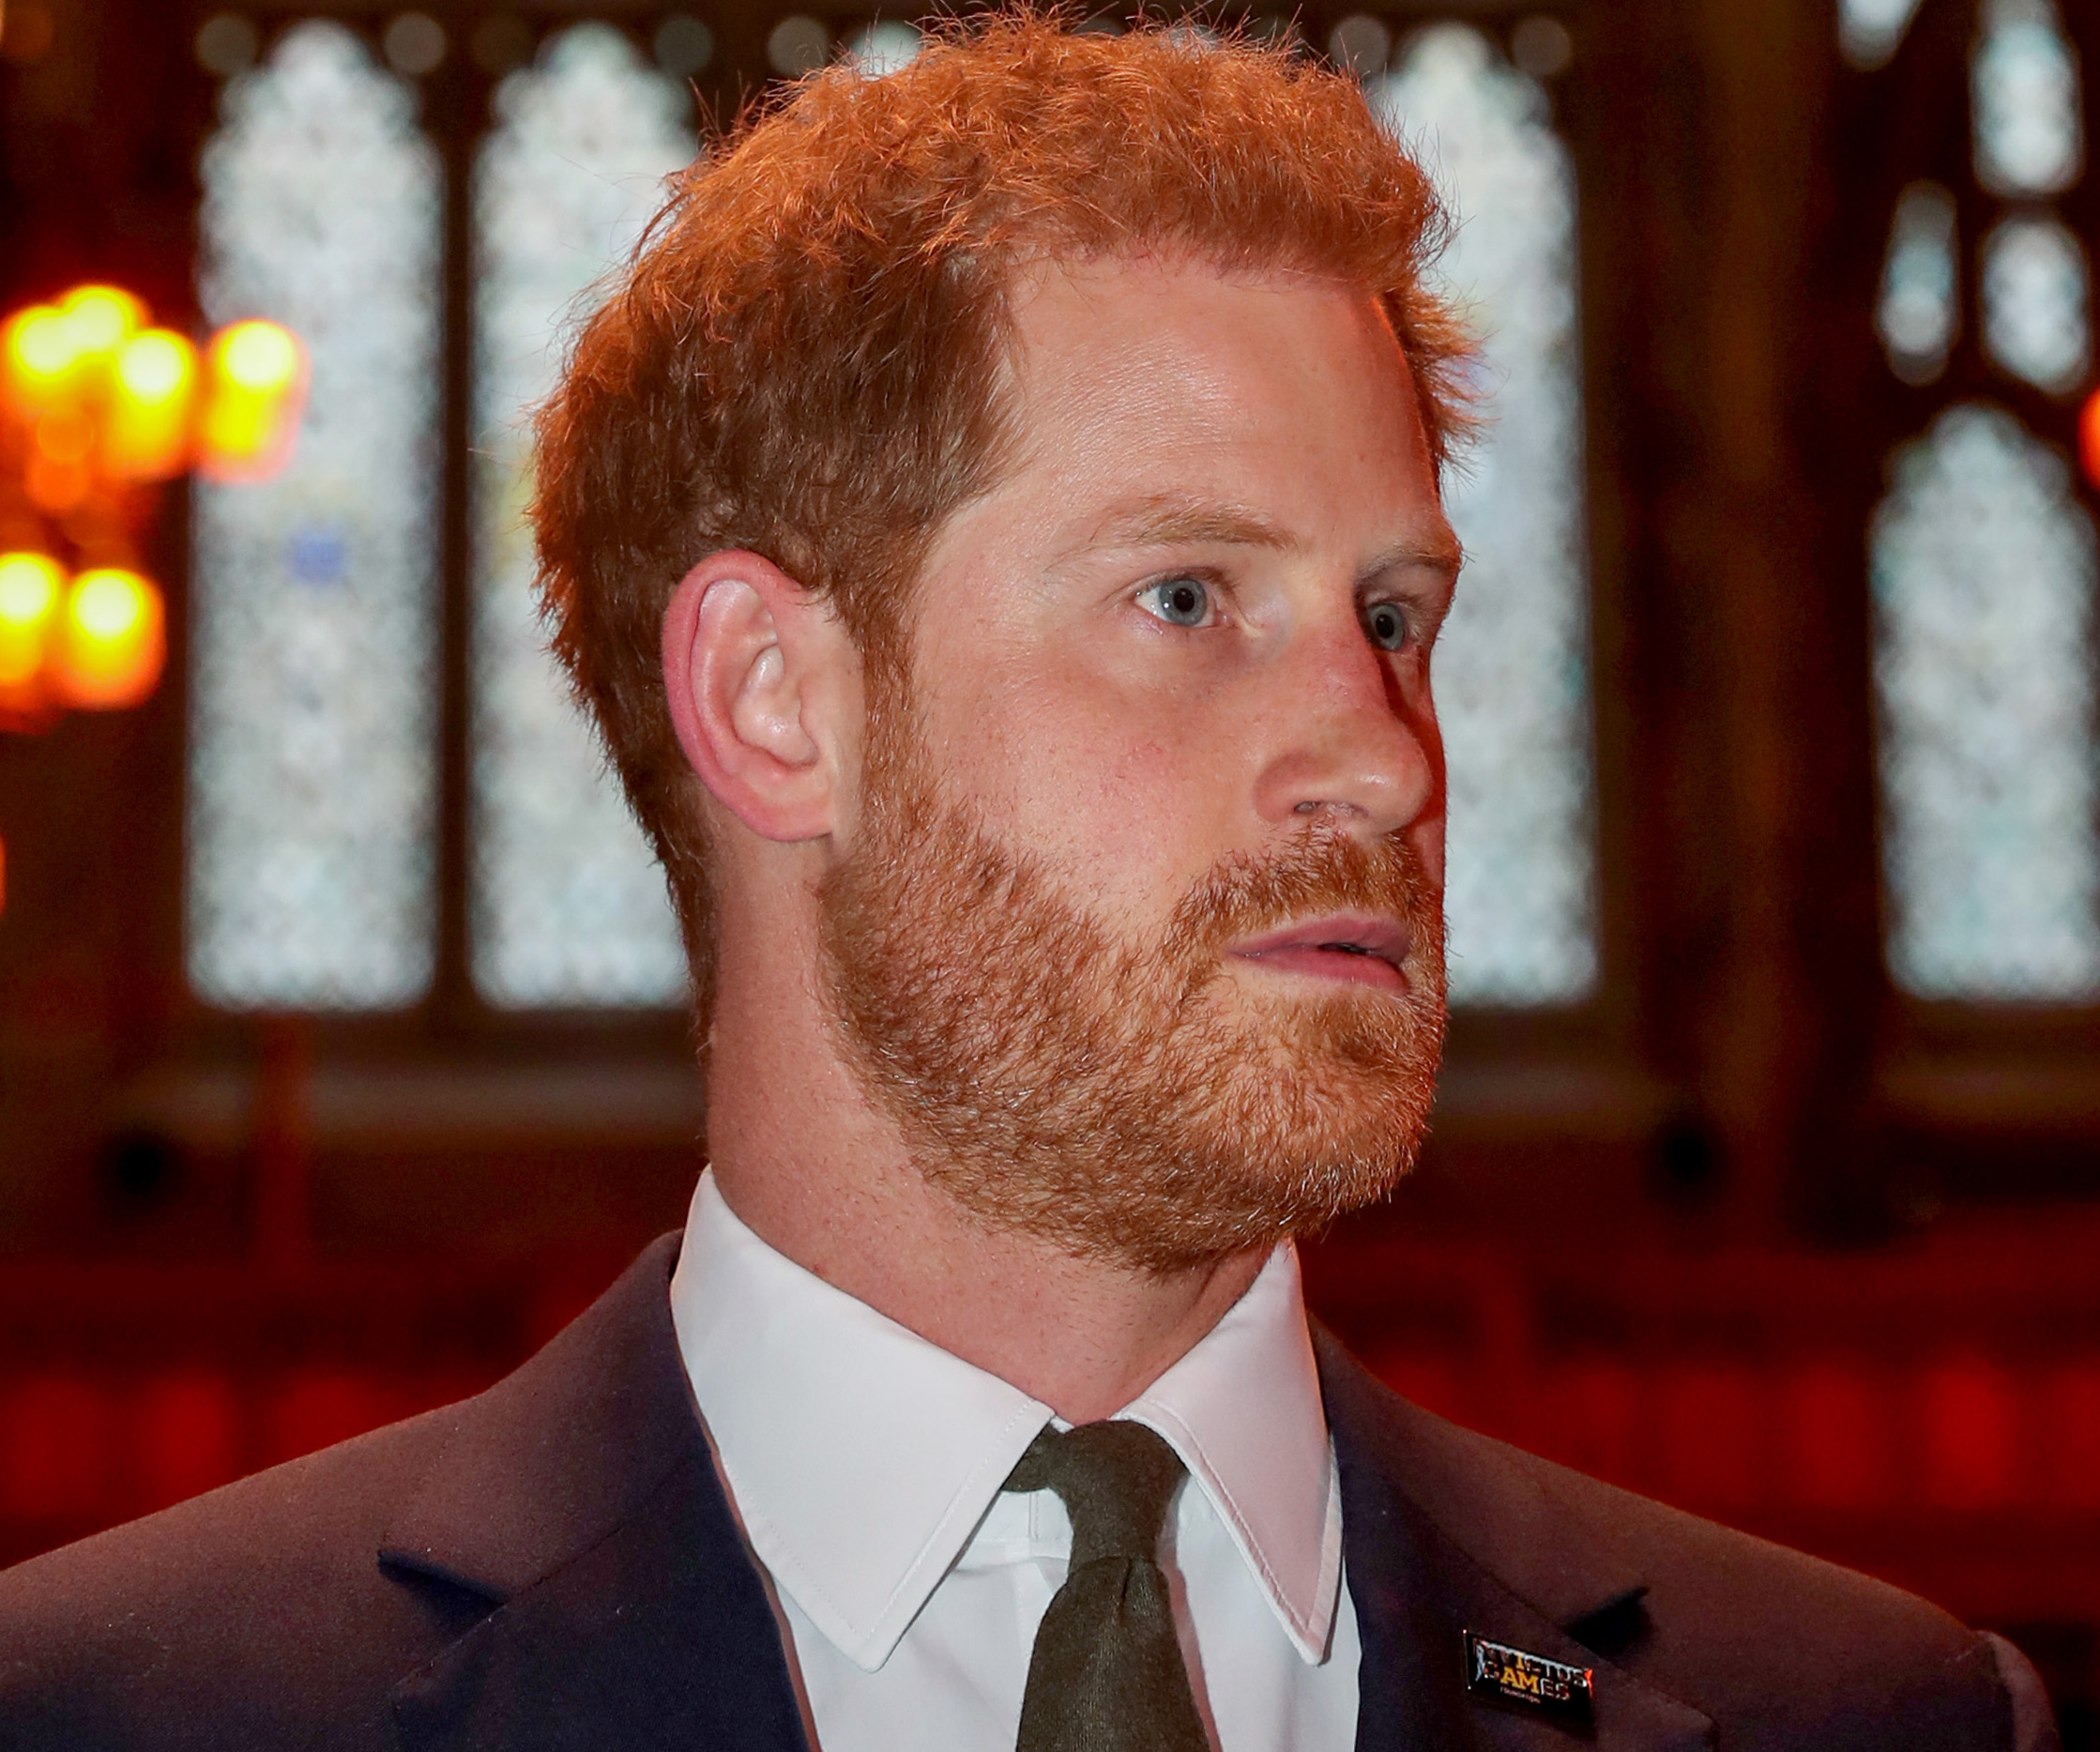 Prince Harry’s passionate, emotional speech marking a huge milestone will melt your heart